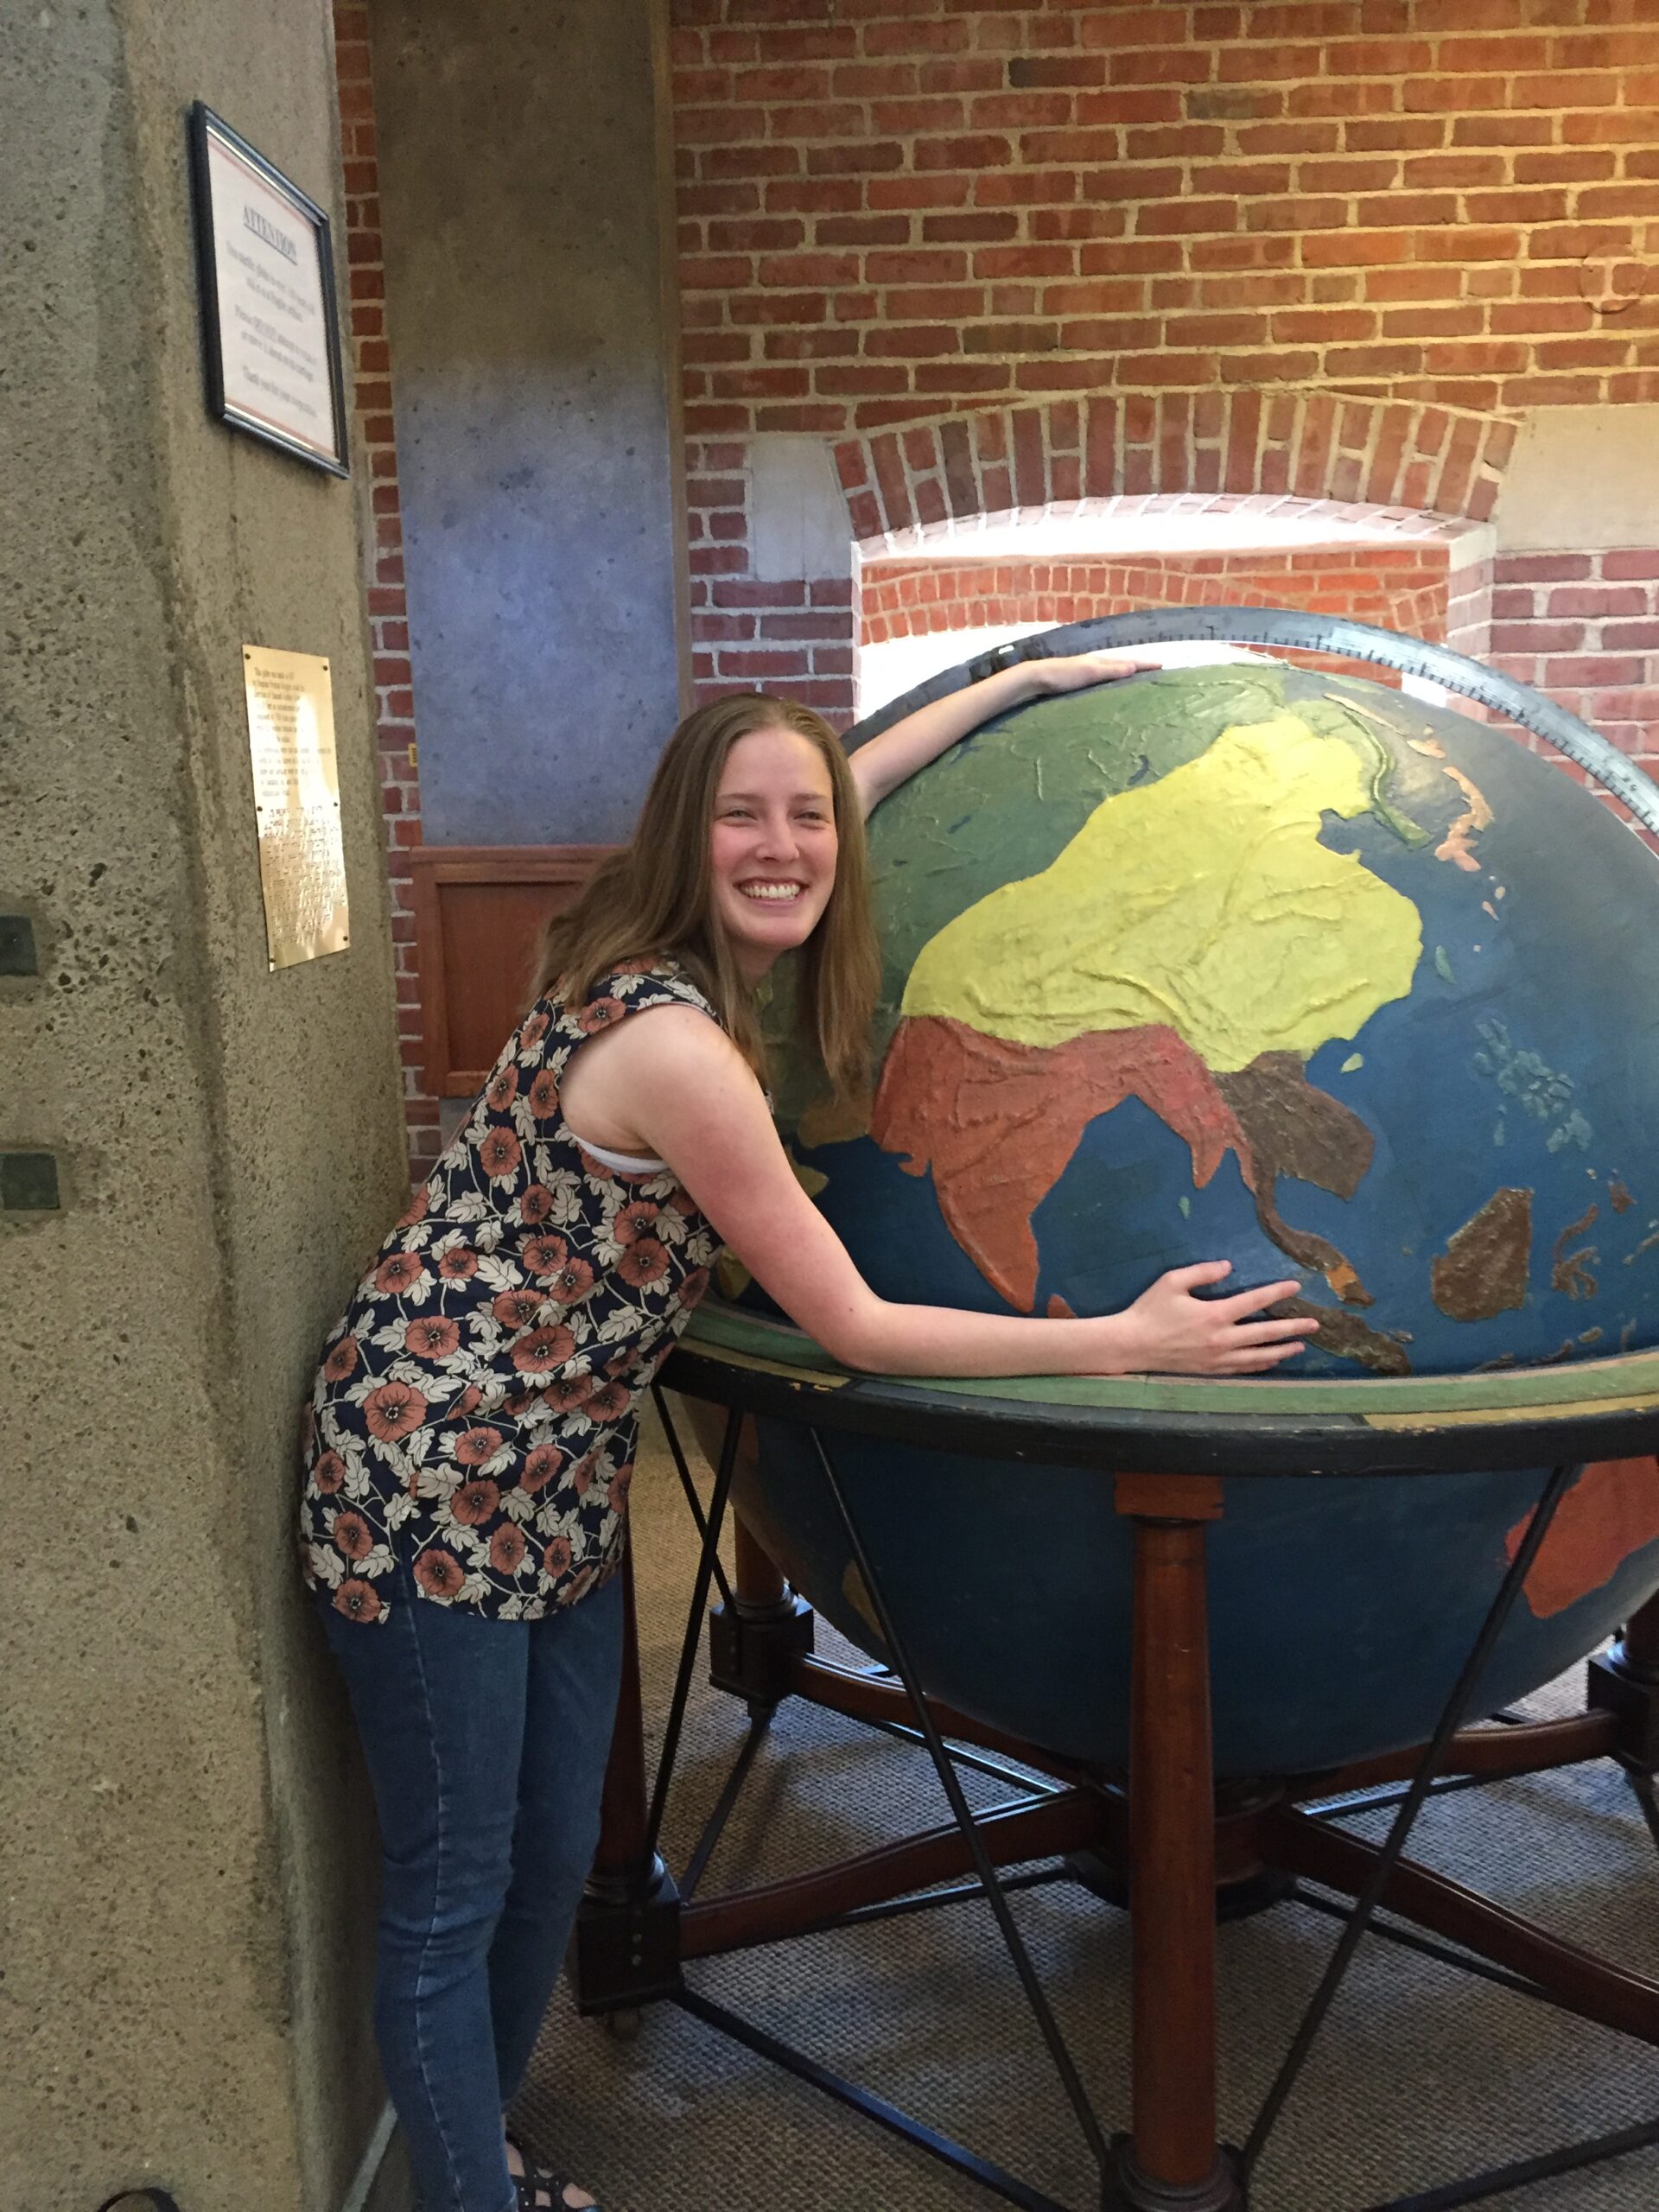 Cynthia is pictured in full length with her arms reaching around a giant, tactile globe at the Perkins School for the Blind. The globe is nearly her height, and is turned to show regions of Southeast Asia and Australia in yellow, brown, and green. Cynthia is grinning, and wears a flower print blouse and blue jeans.